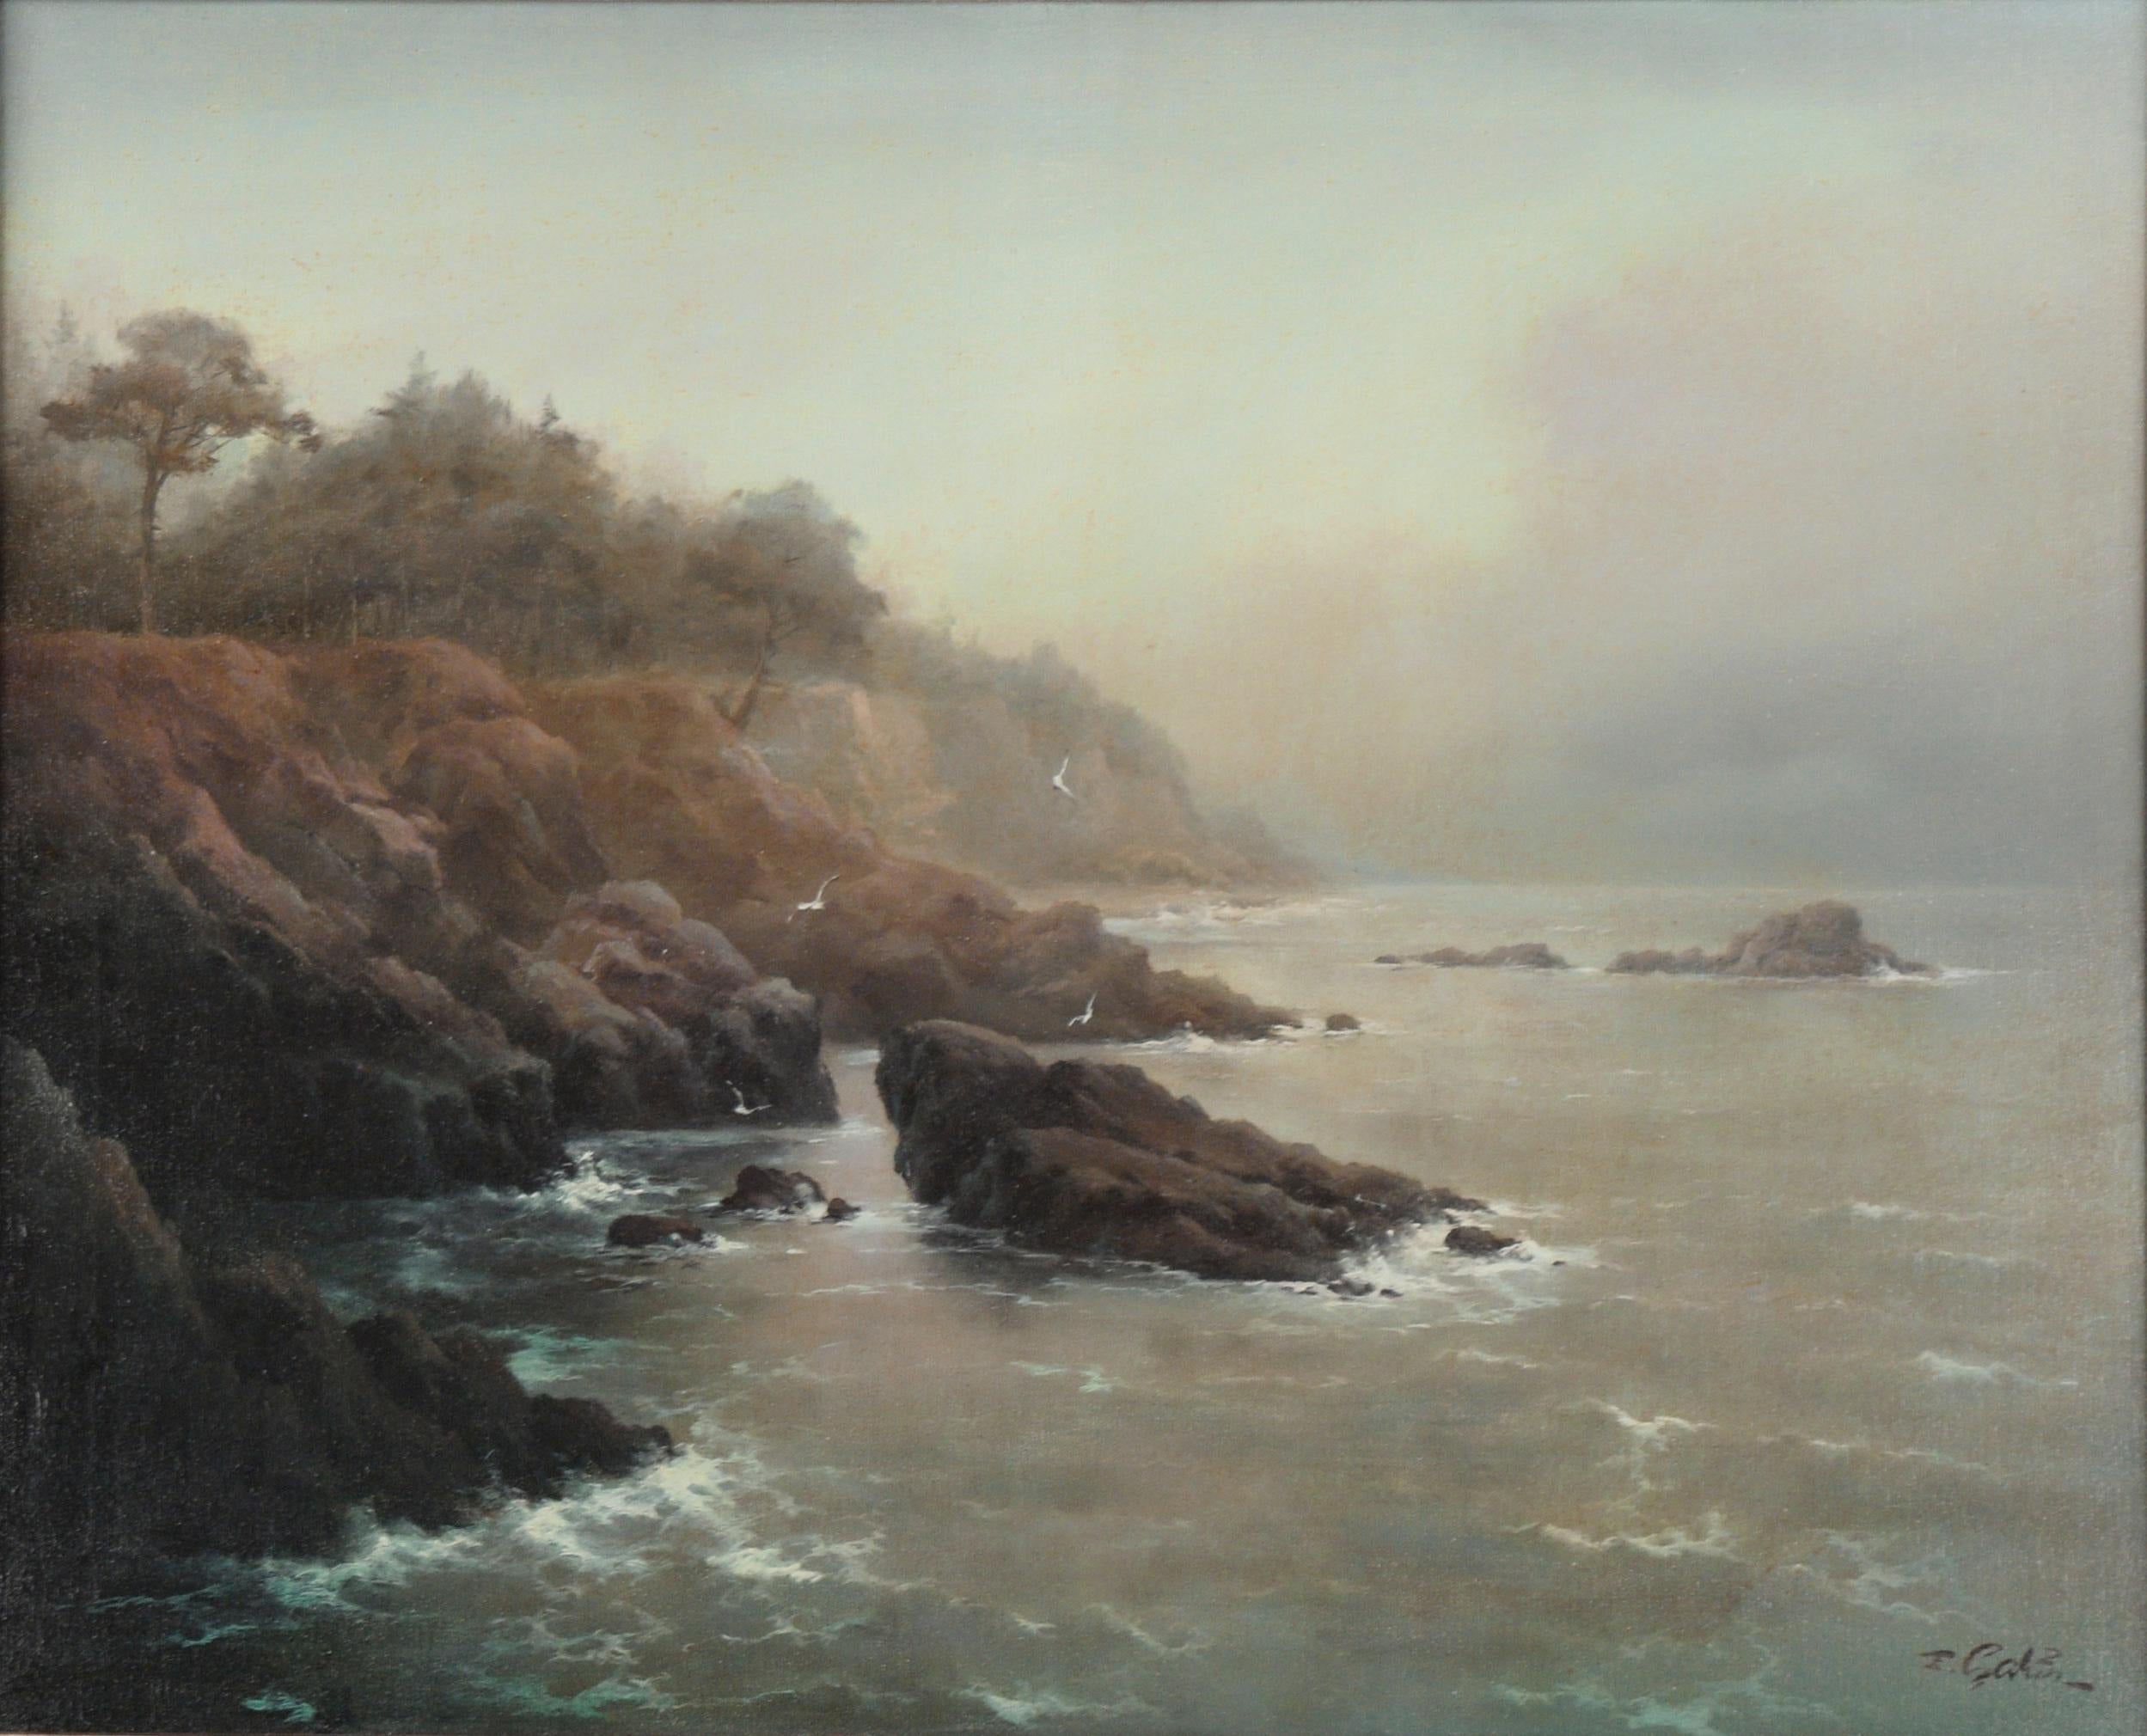 Misty Morning at Near Point, Carmel Seascape - Painting by Eugene Garin 